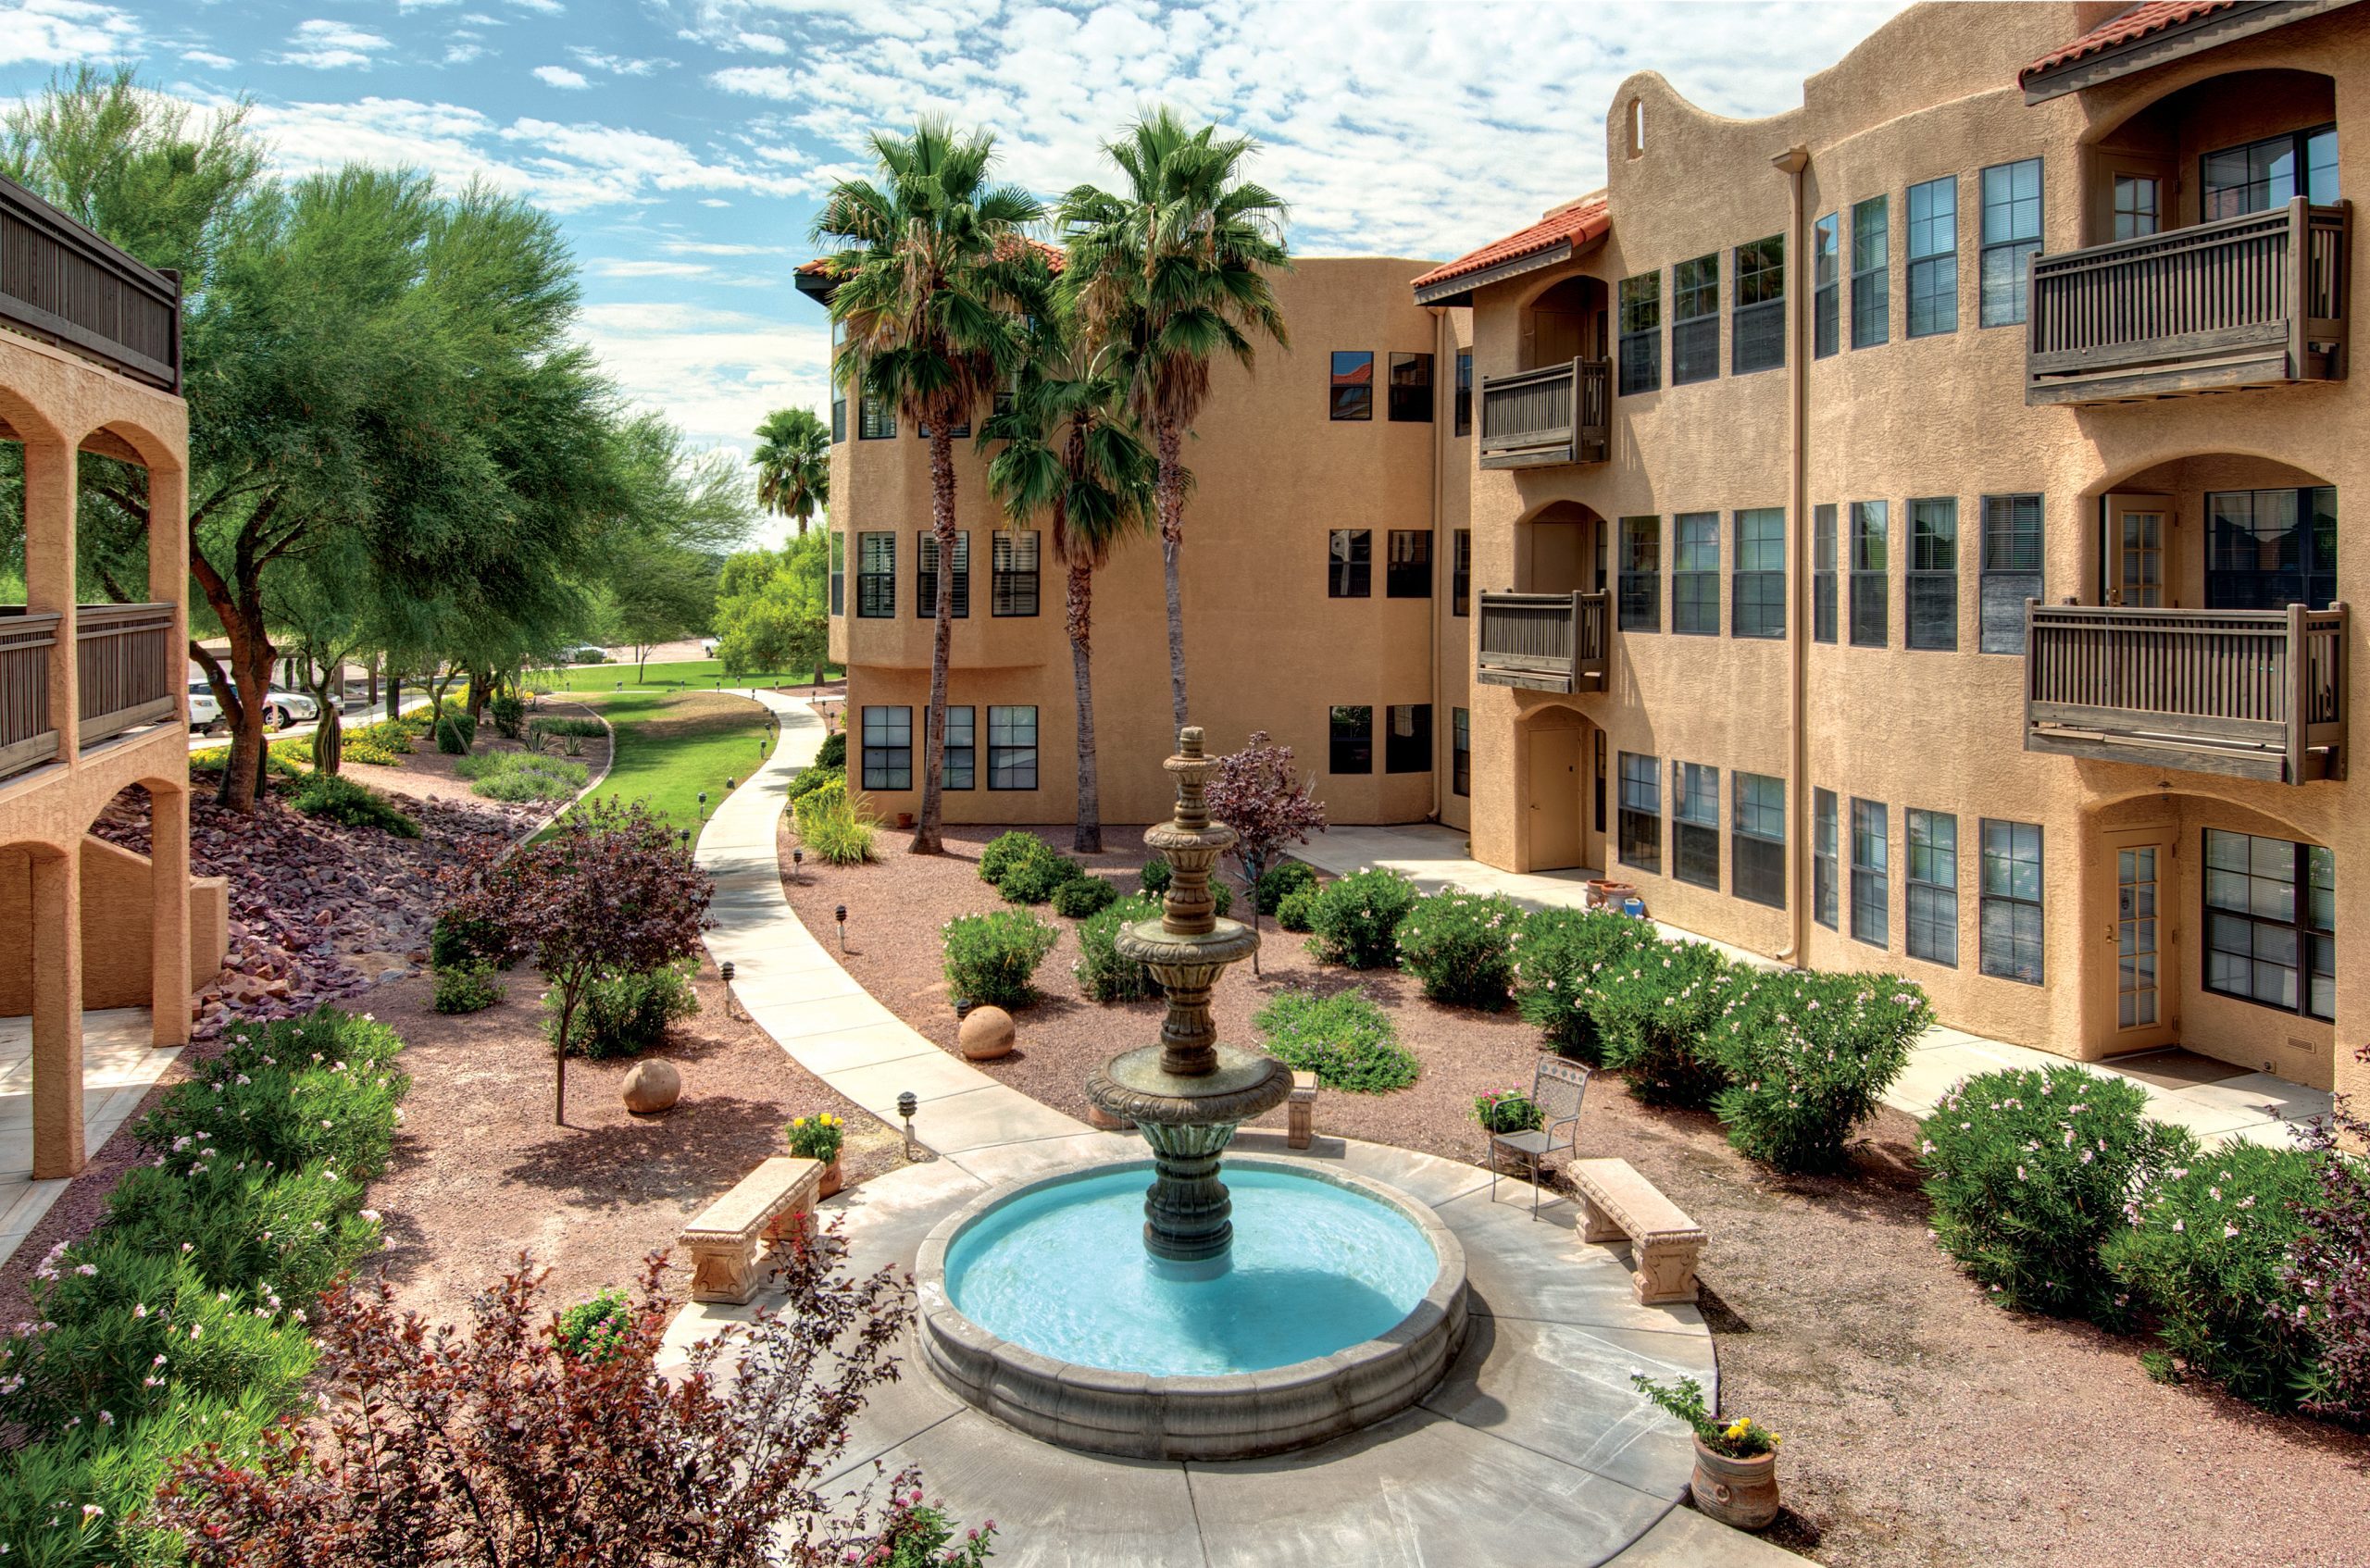 The serene courtyard in Arizona, surrounded by lush greenery and charming architecture.